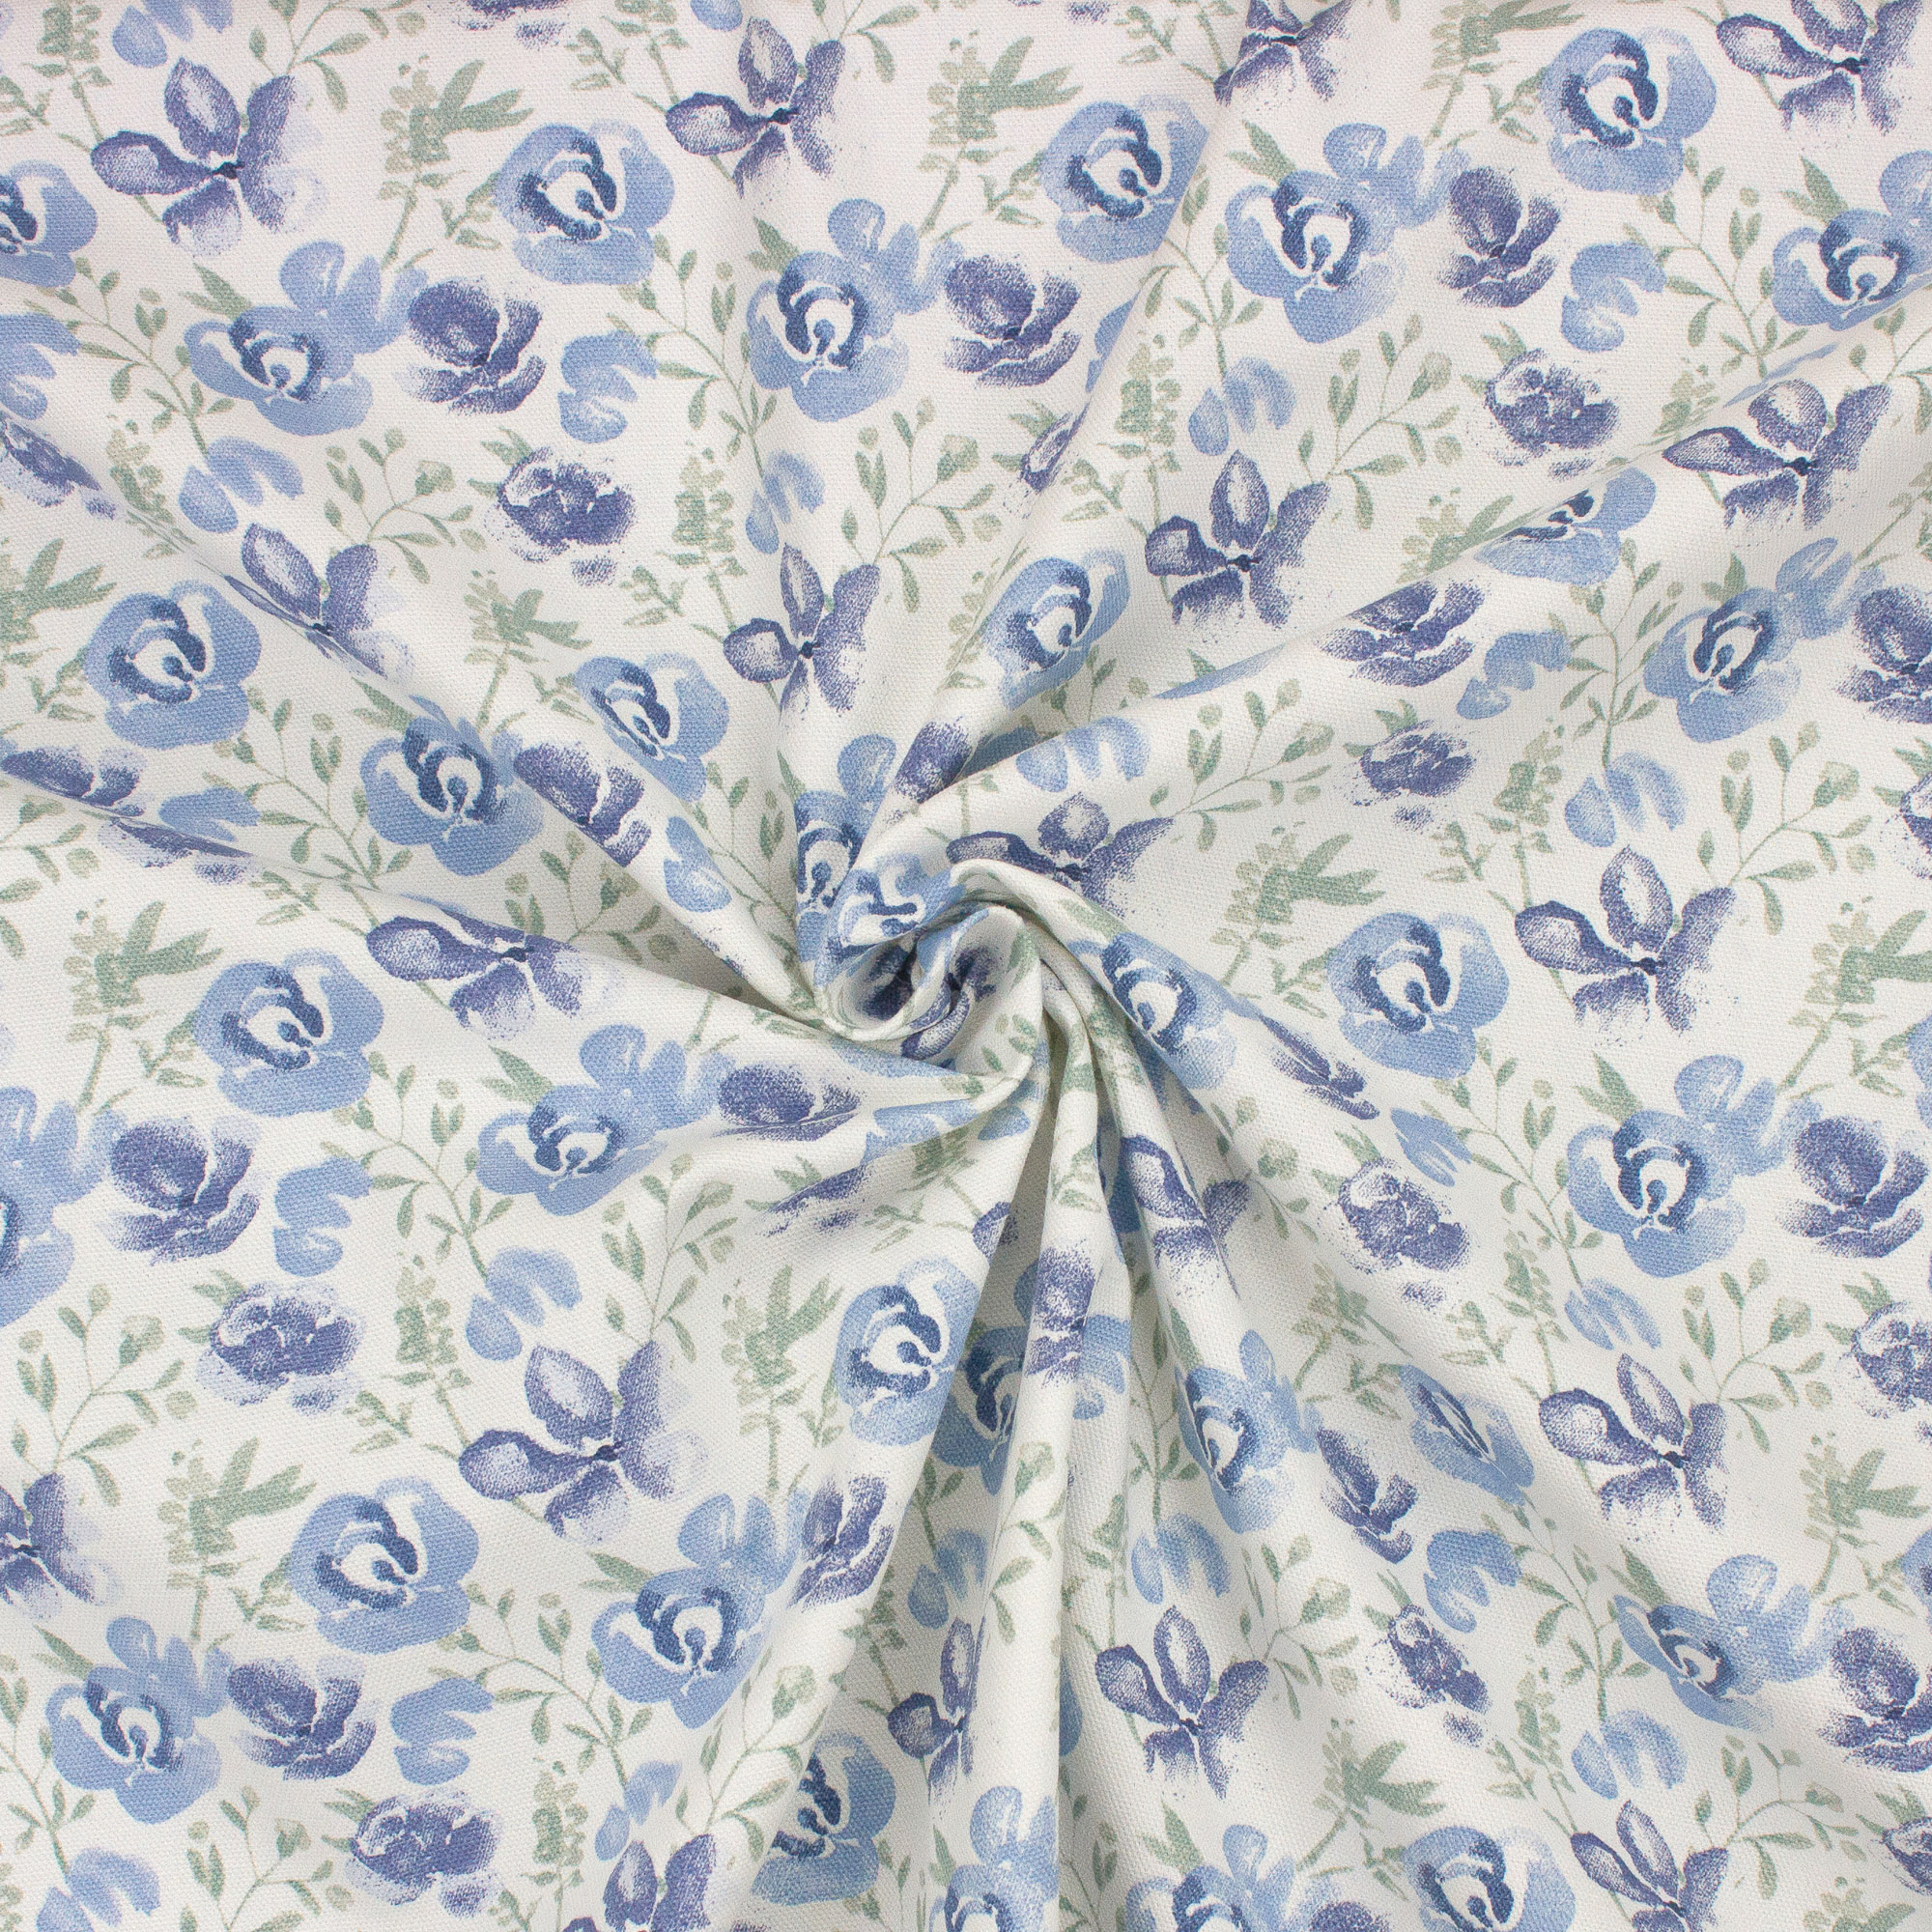 Better Homes & Gardens 100% Cotton Watercolor Floral Blue, 2 Yard Precut Fabric - image 3 of 6